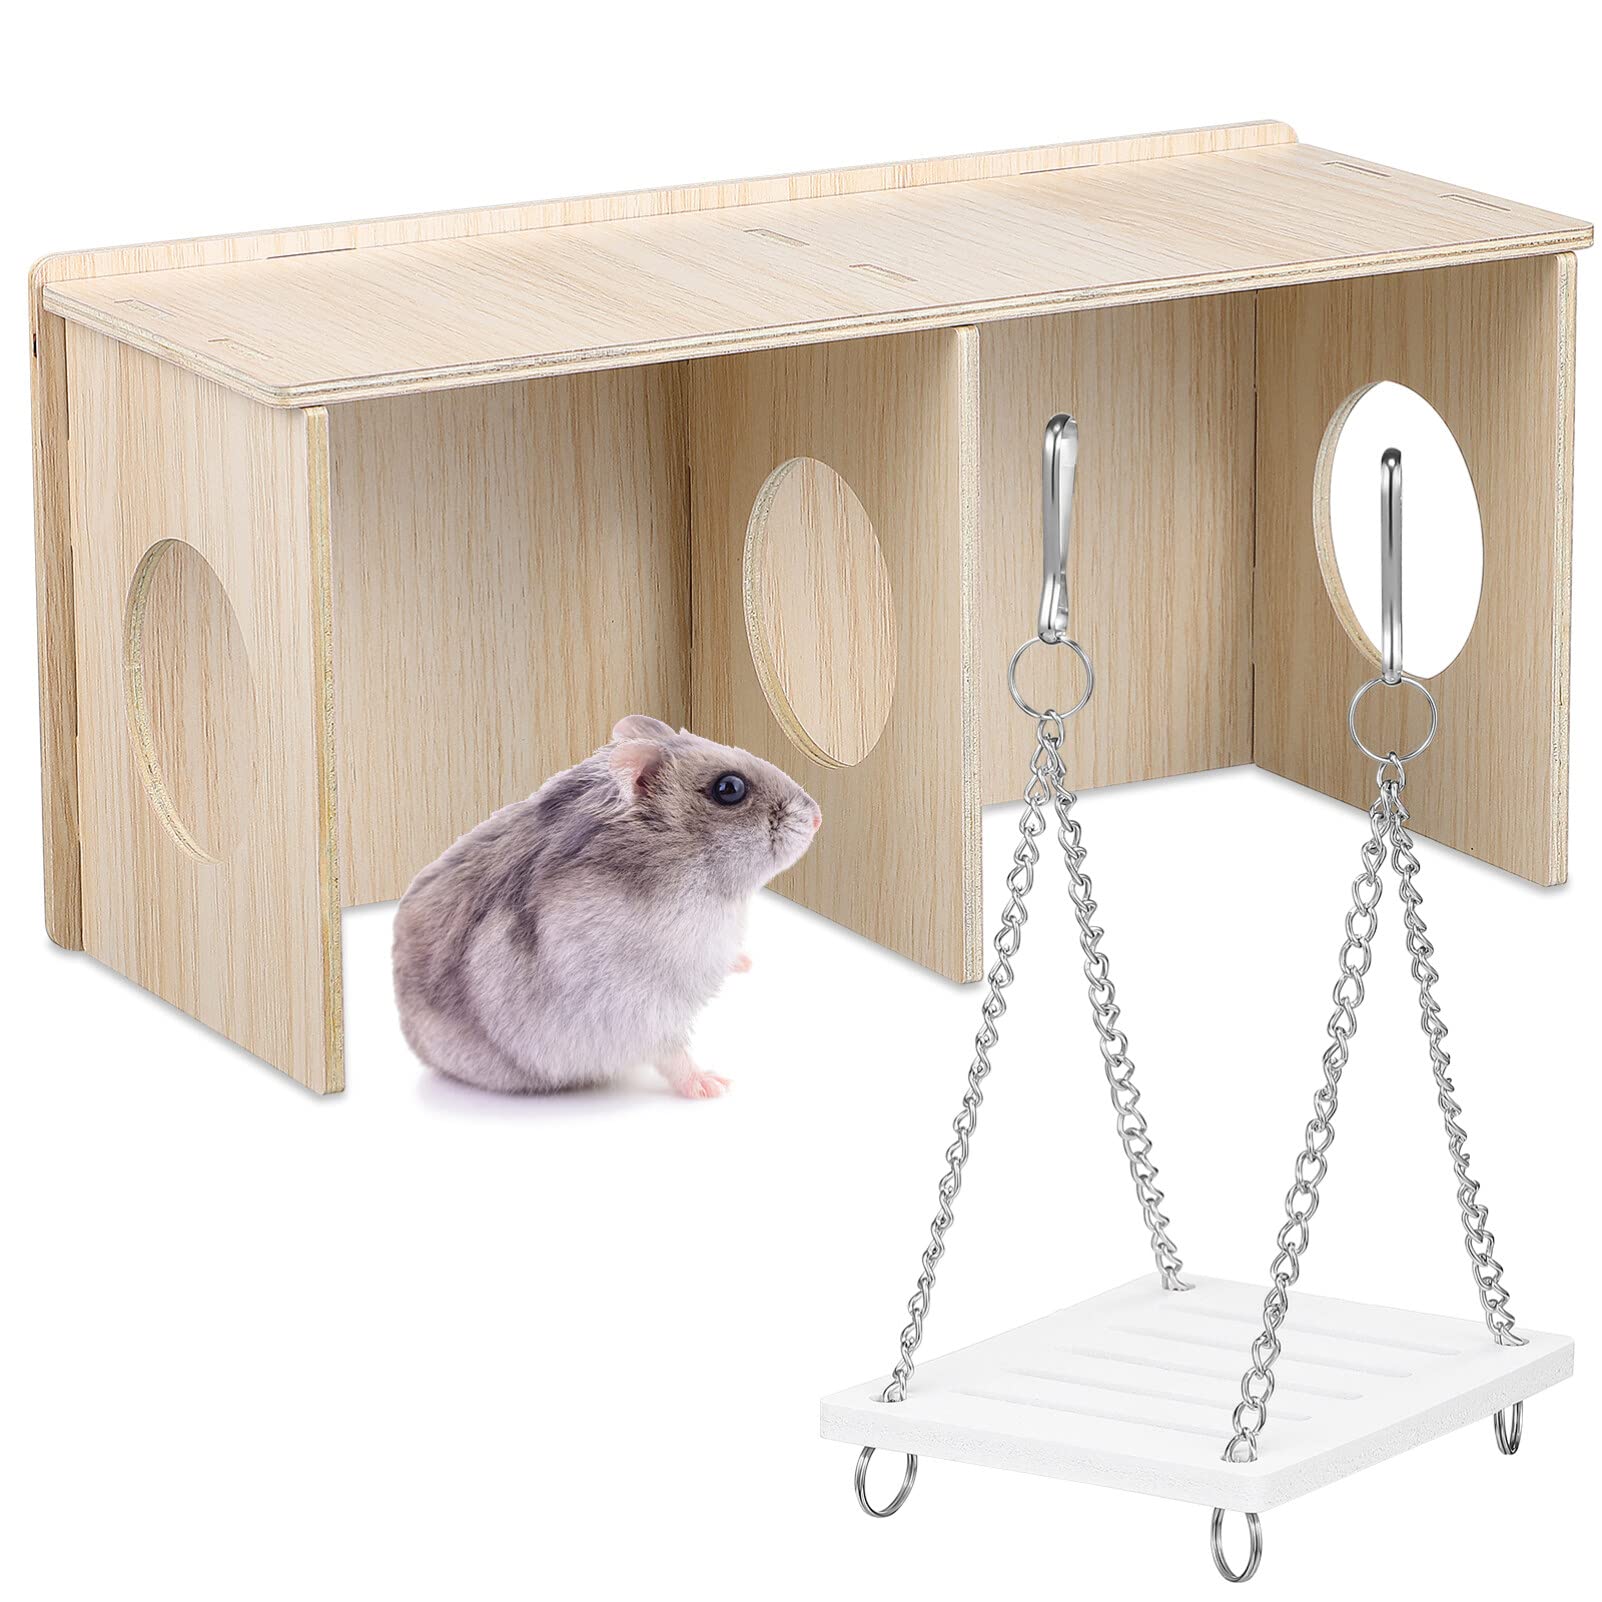 30 X POPETPOP HAMSTER HIDE 2 PIECES HAMSTER WOOD HOUSE WITH HANGING NATURAL WOODEN HAMSTER SWING SET GUINEA PIG TOYS HIDING HOUSE FOR SMALL ANIMALS HABITAT DECOR - TOTAL RRP £305: LOCATION - RACK B